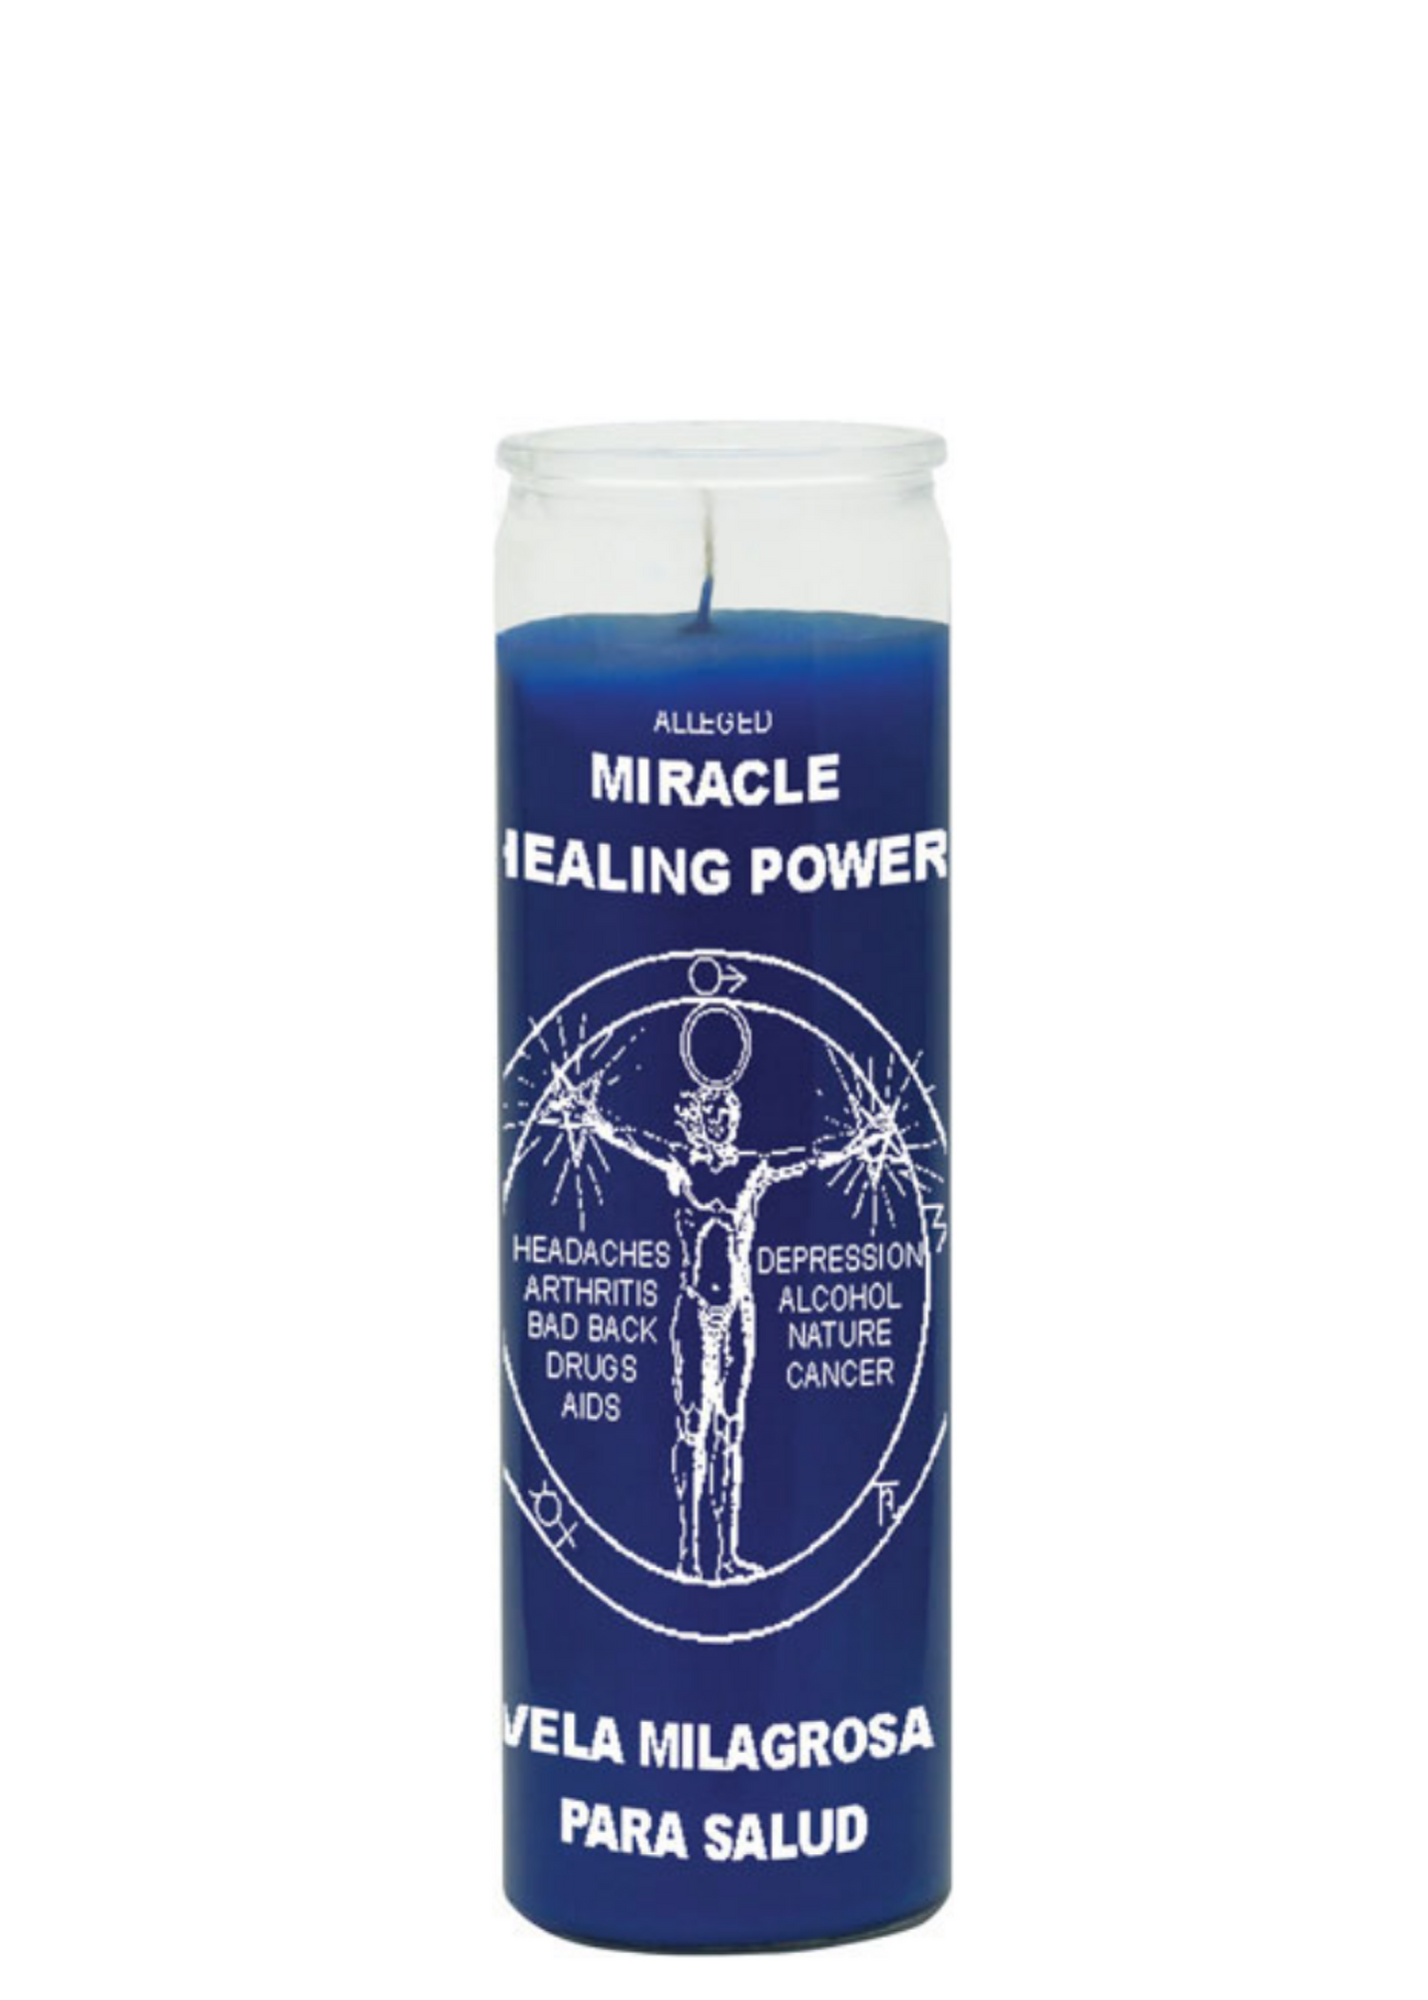 Miracle healing (blue) 1 color 7 day candle